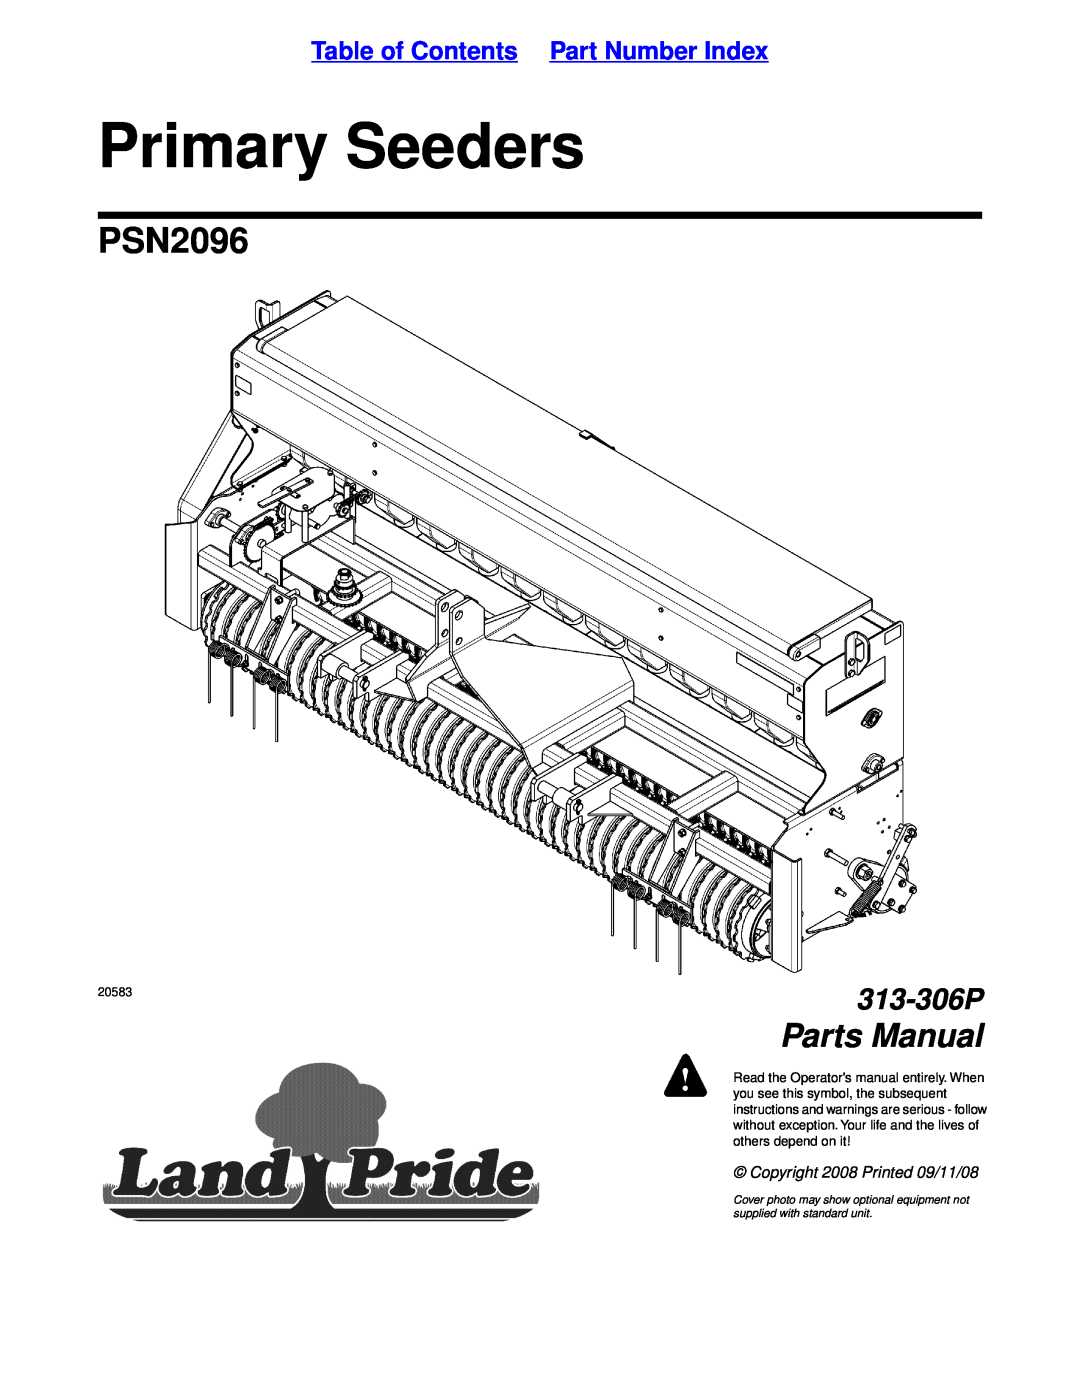 Land Pride 20583 manual Table of Contents Part Number Index, Primary Seeders, PSN2096, Parts Manual, 313-306P 